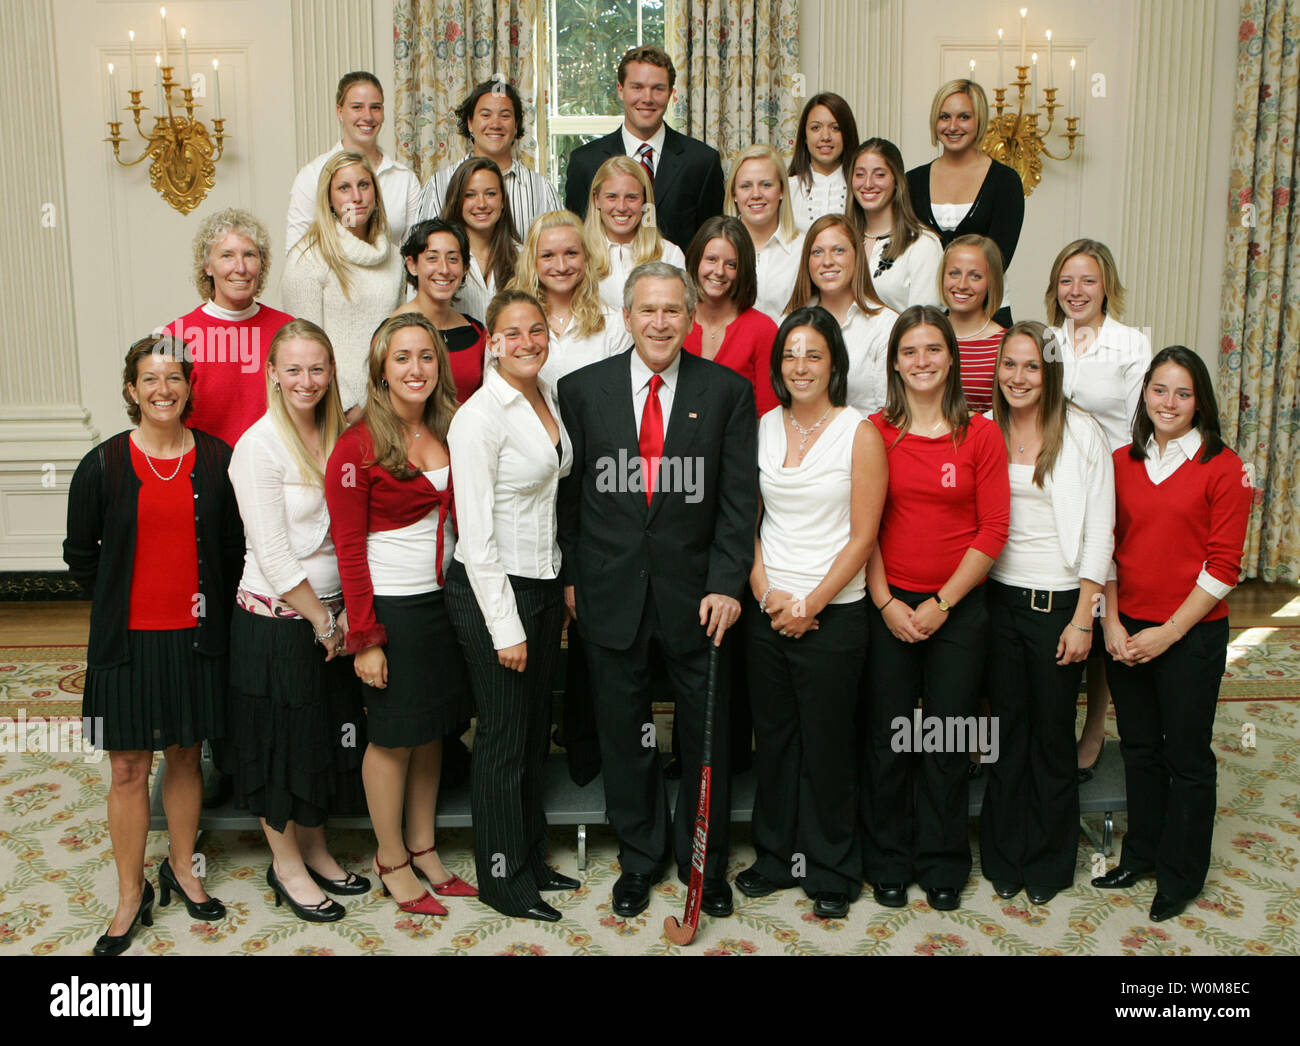 President George W. Bush holds a photo opportunity with the 2005 and 2006 NCAA Champions University of Maryland Women's Field Hockey Team, at the White House in Washington on April 4, 2006. (UPI Photo/Paul Morse/White House) Stock Photo